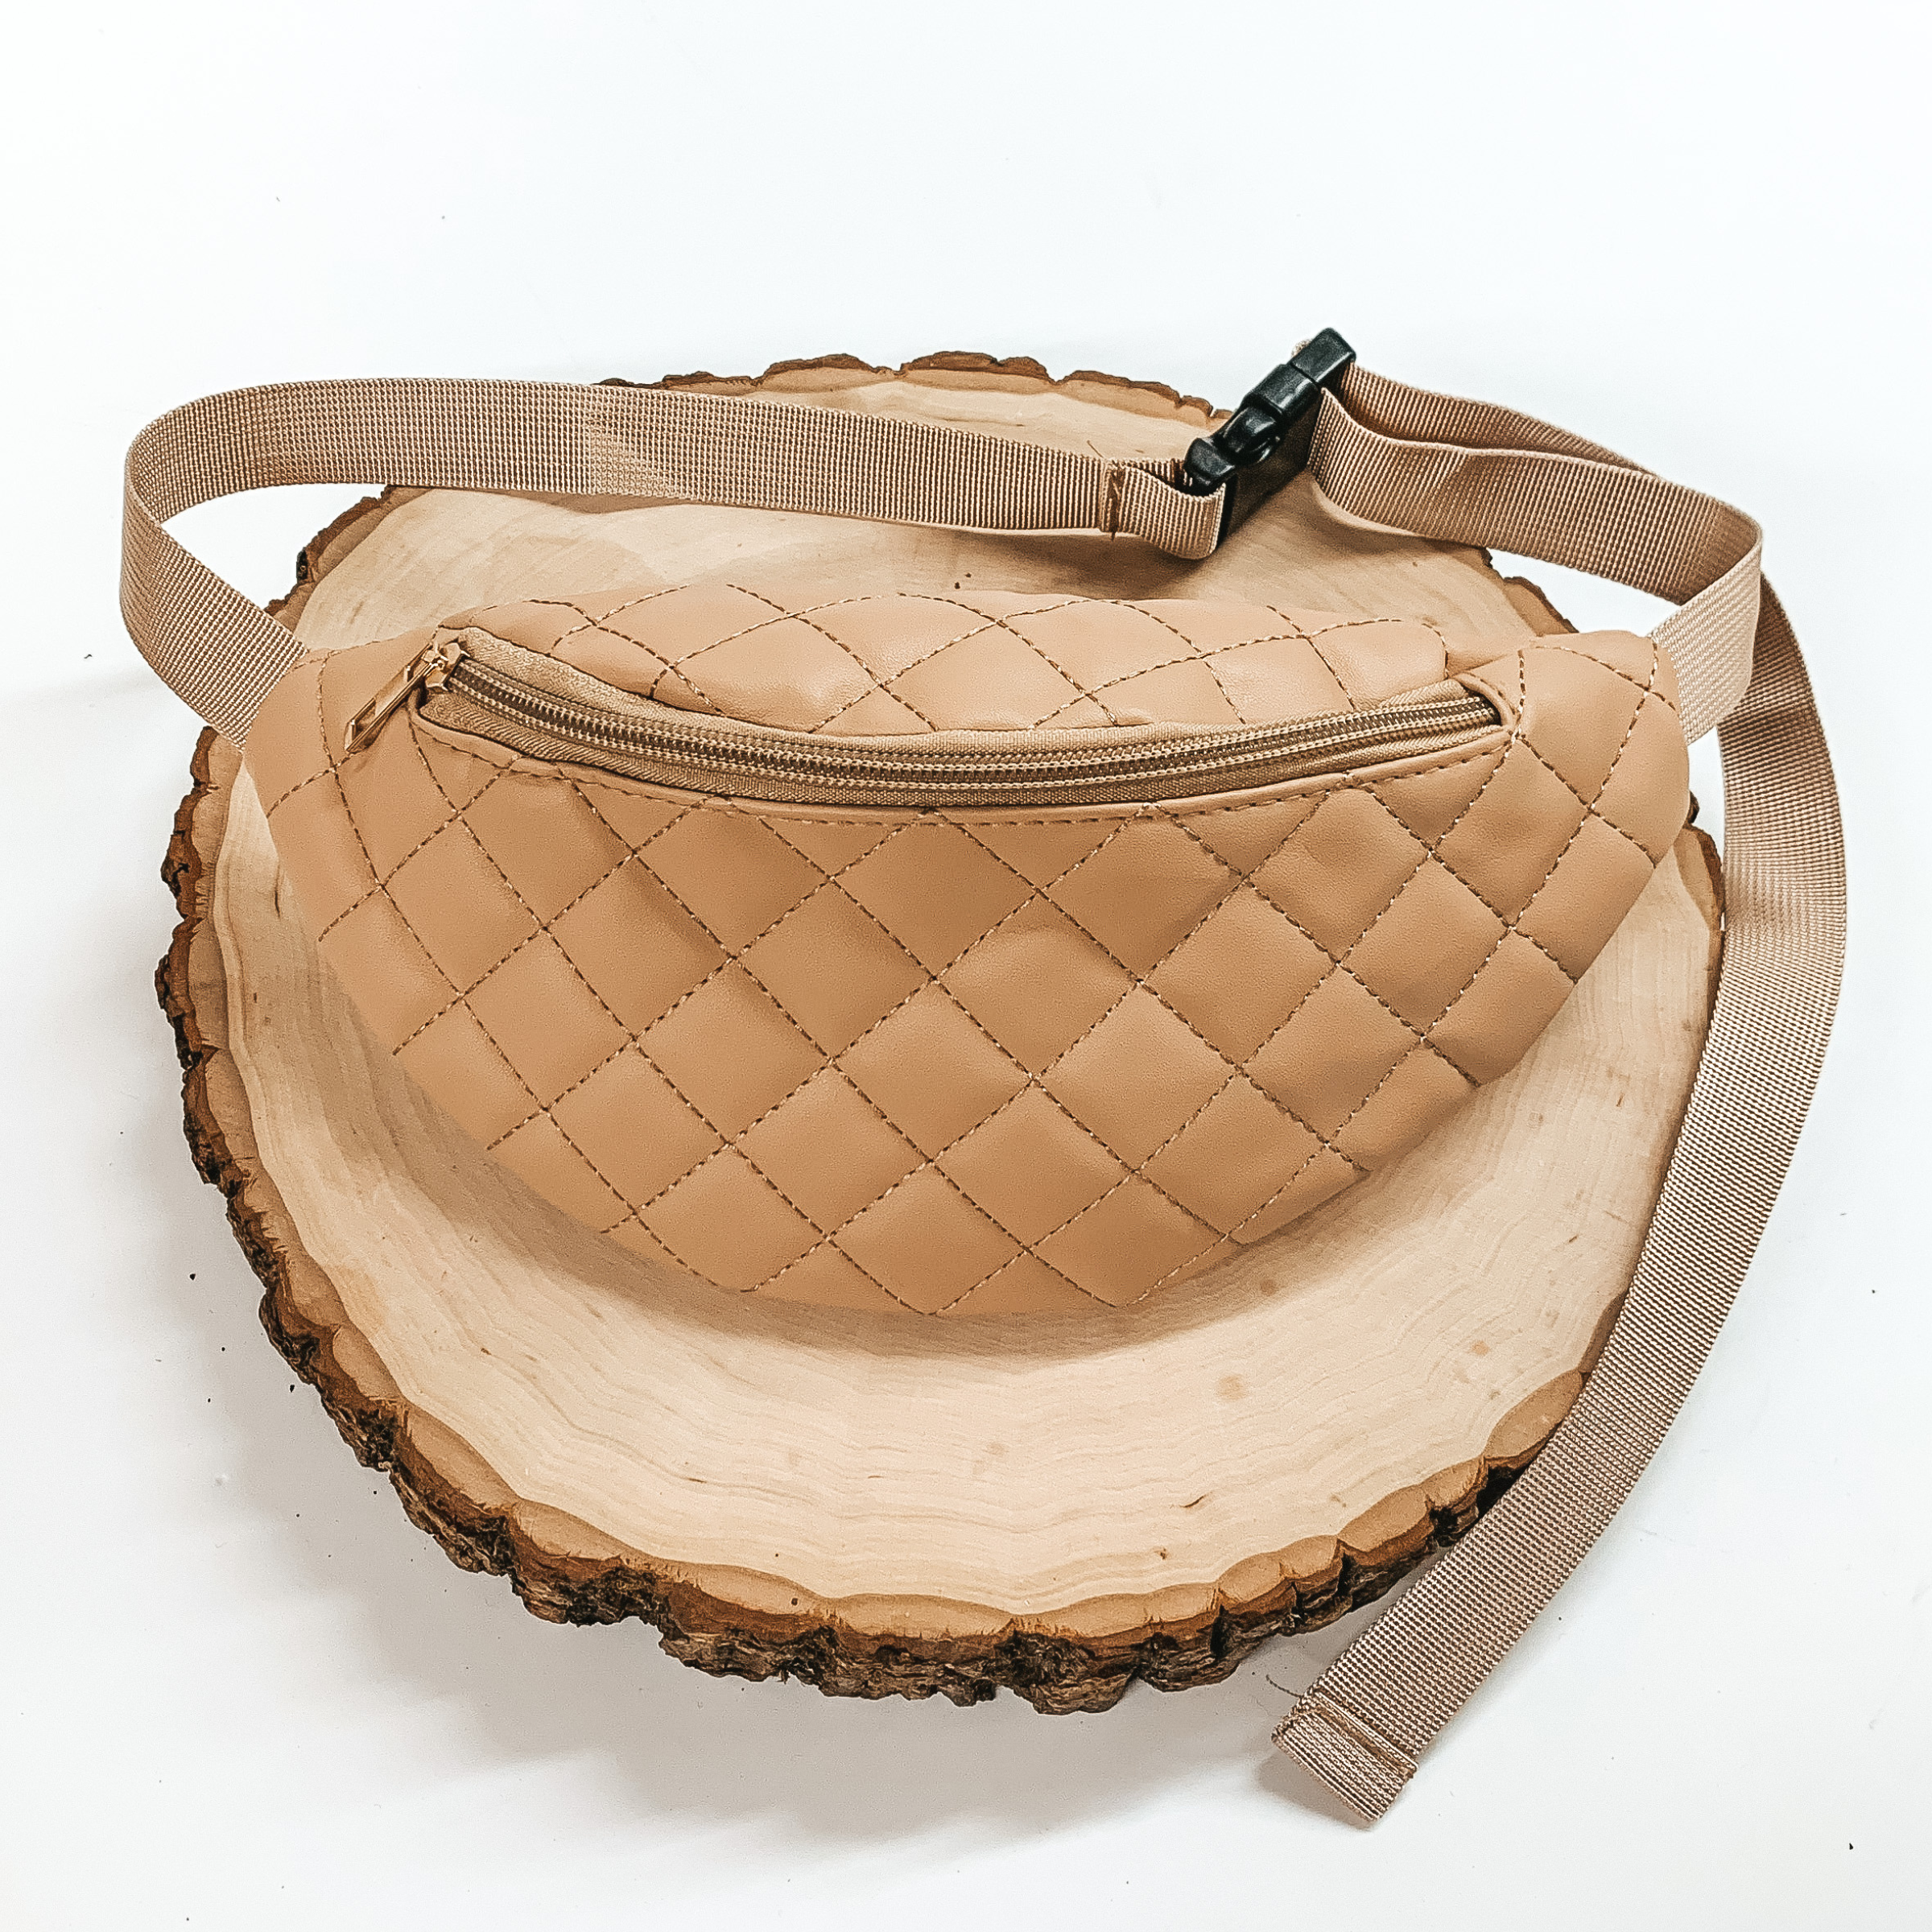 Beige, quilted fanny pack with a zipper across the front. This fanny pack also includes beige straps and black clips. This fanny pack is pictured on a piece of wood on a white background. 